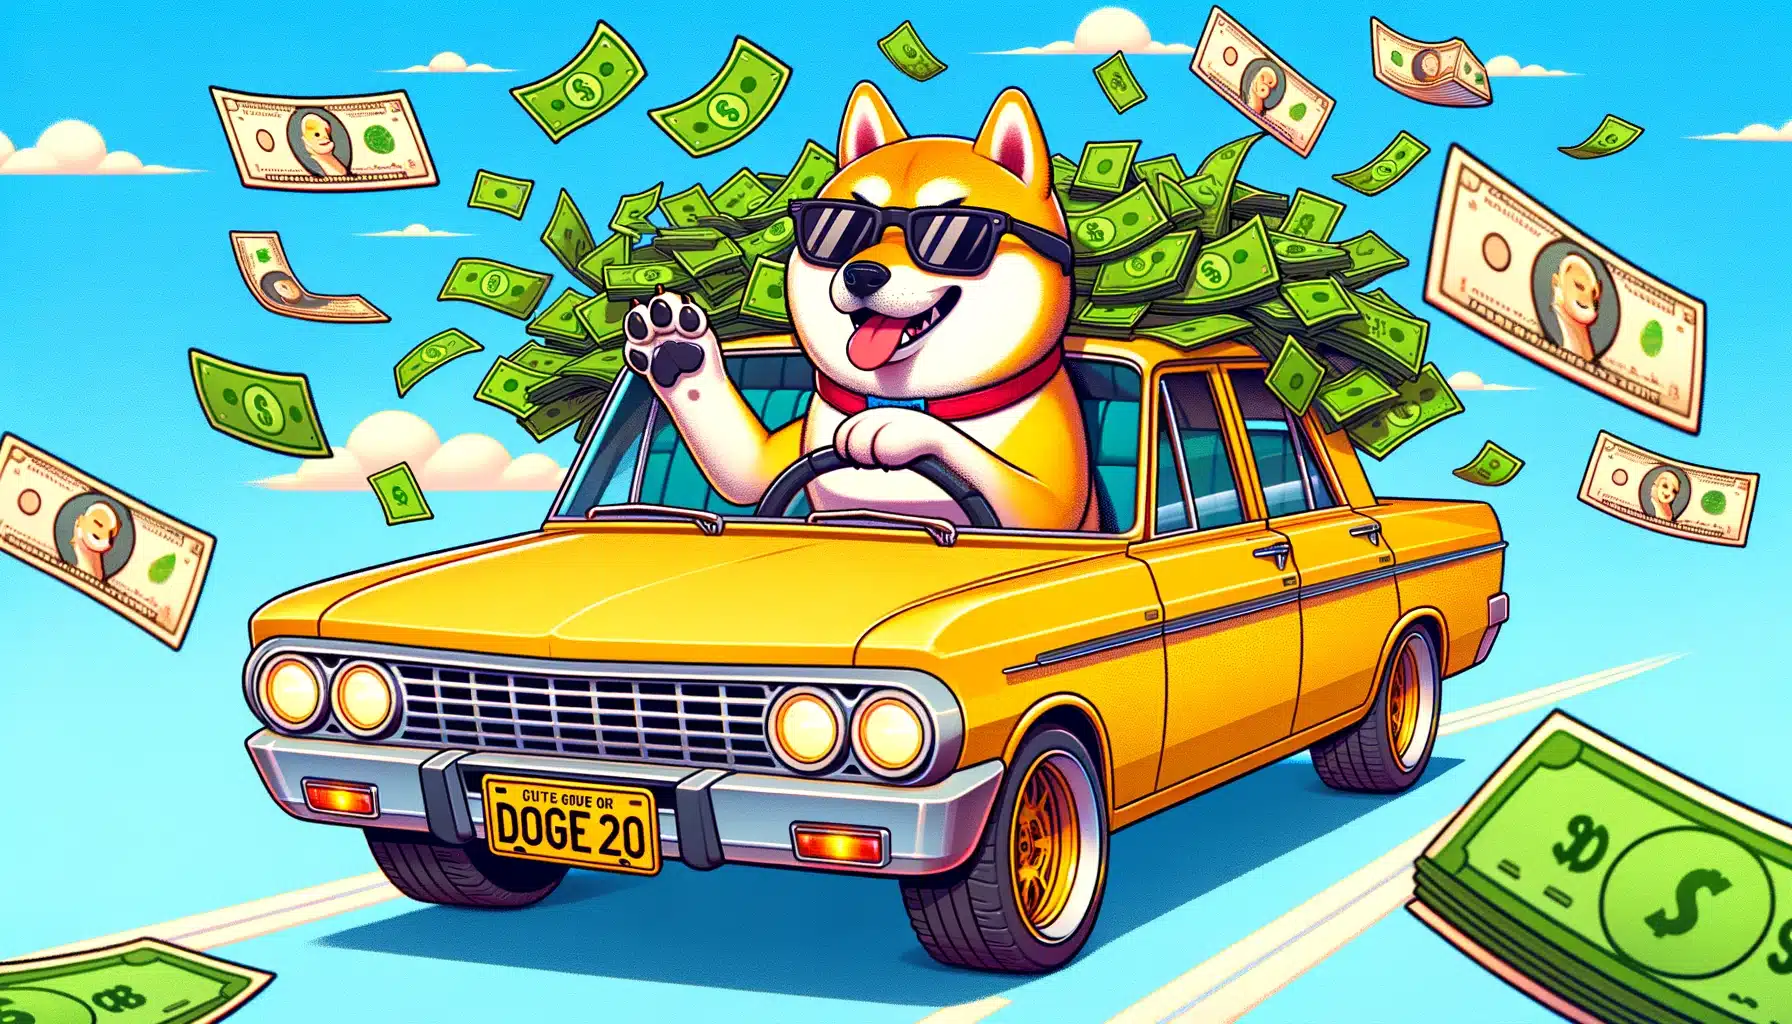 Dogecoin 20 Token Hits $5M in Presale, Sparks Predominant Hype Among Traders